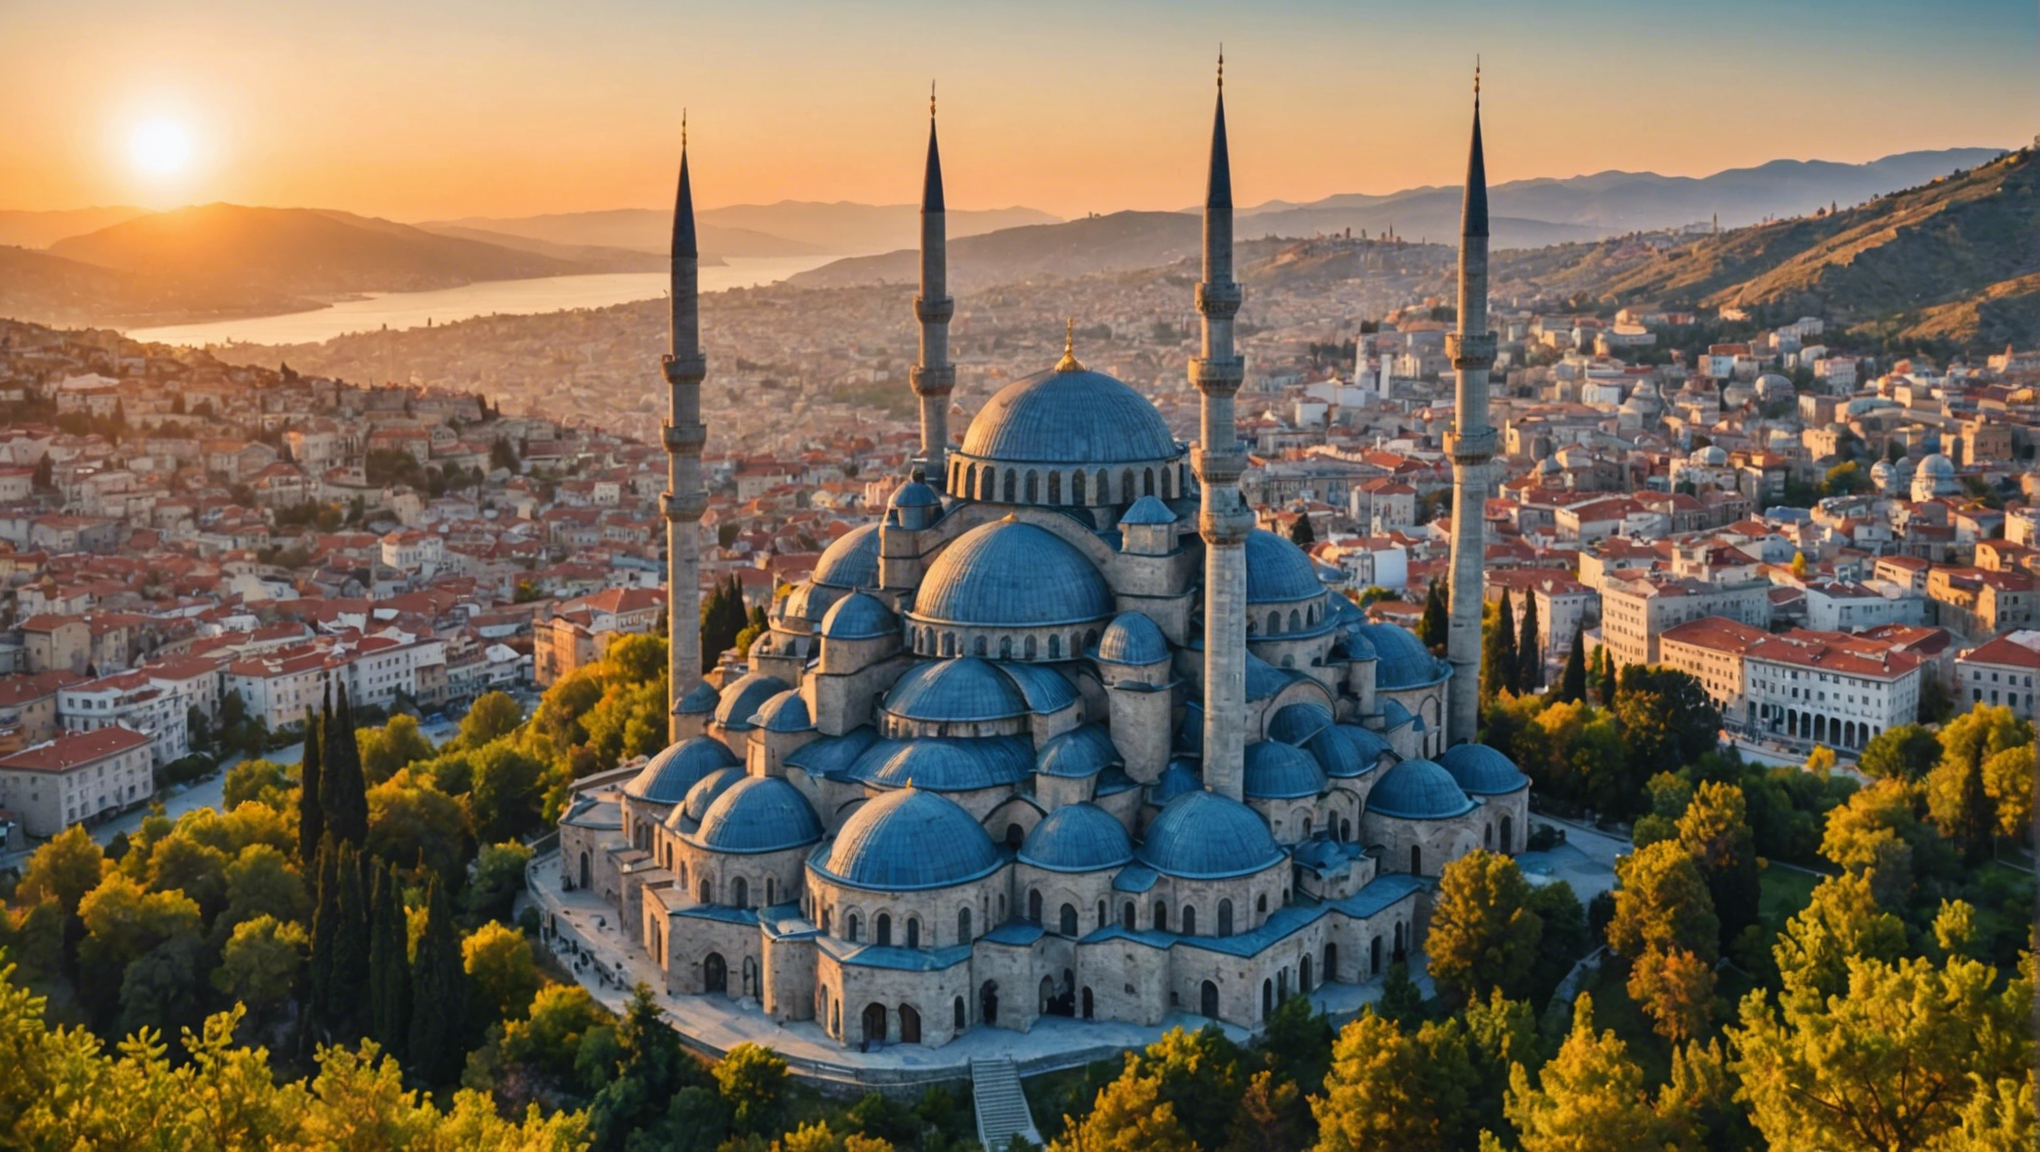 discover the must-see sites in turkey for a memorable holiday. visit the historical treasures and extraordinary landscapes of this magnificent mediterranean country.